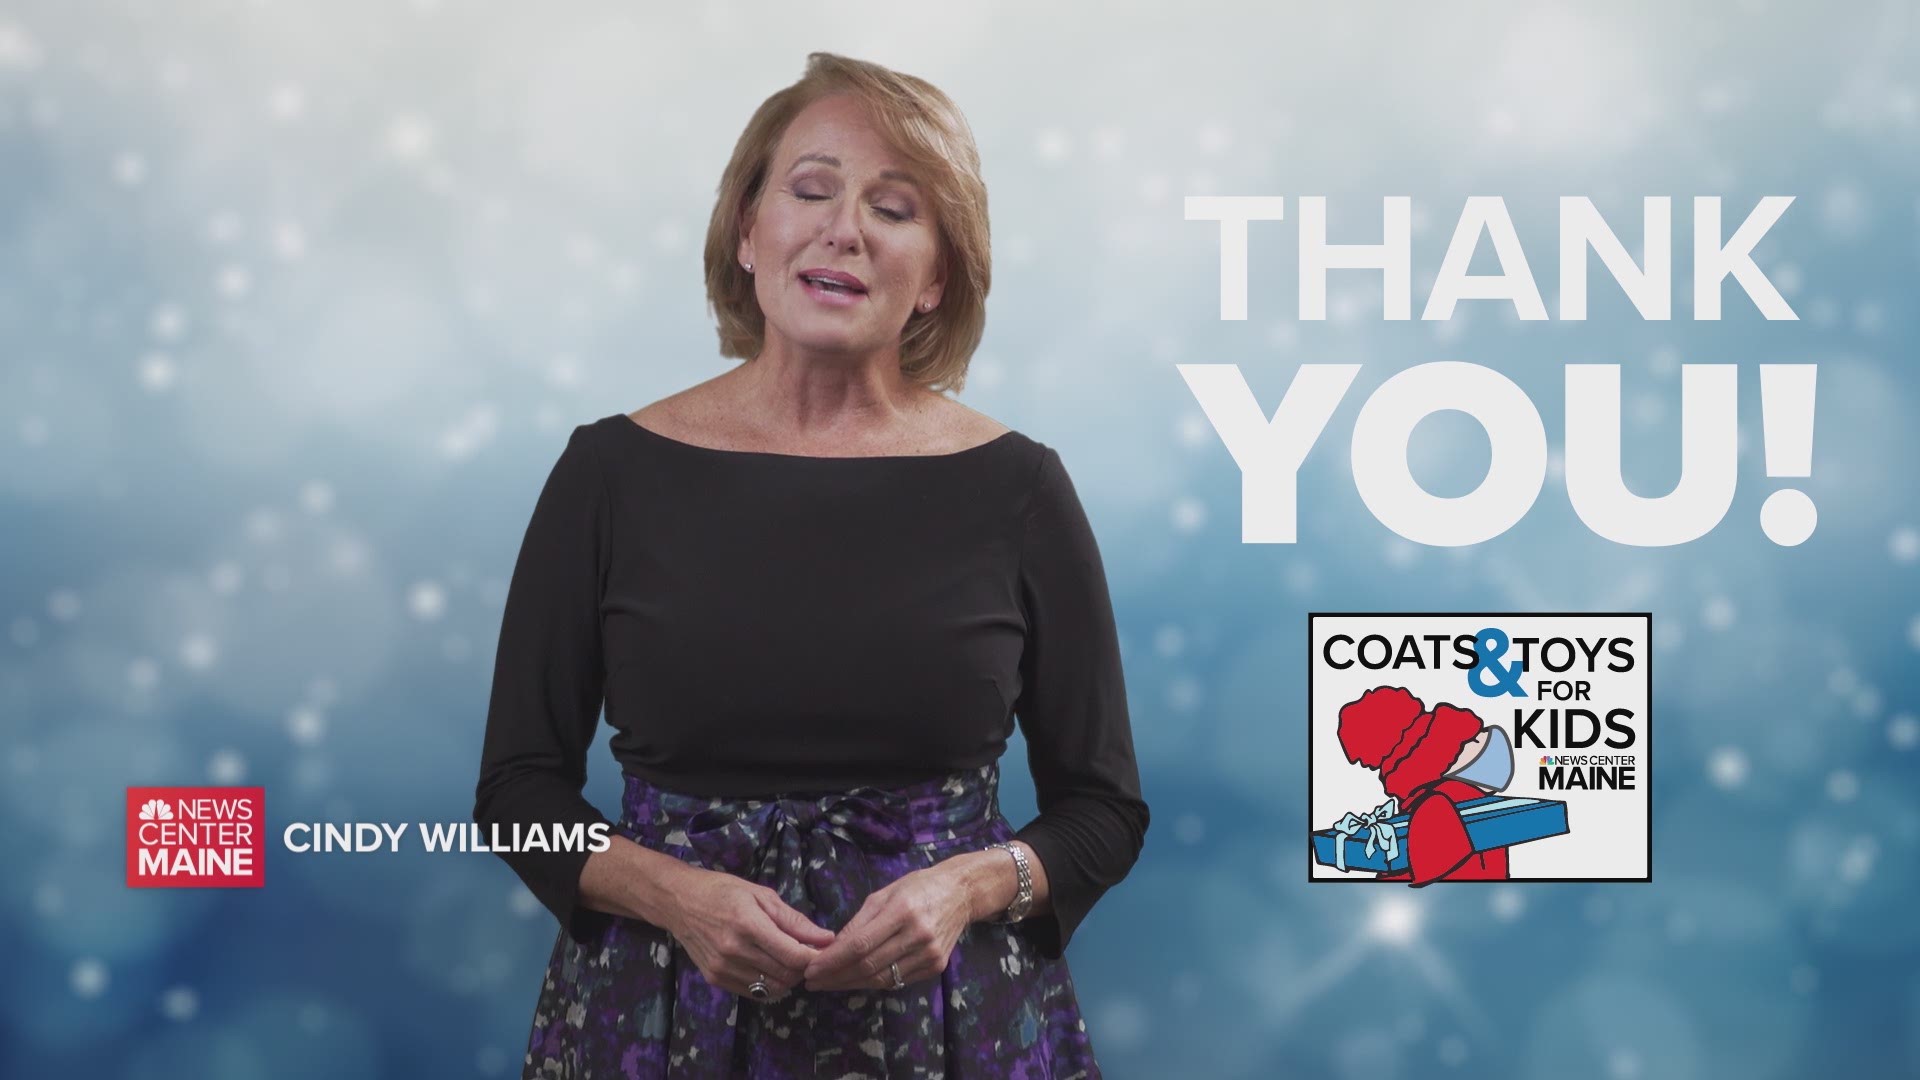 Thank you for helping to keep Maine children warm and happy this year through NEWS CENTER Maine's Coats and Toys for Kids campaign.